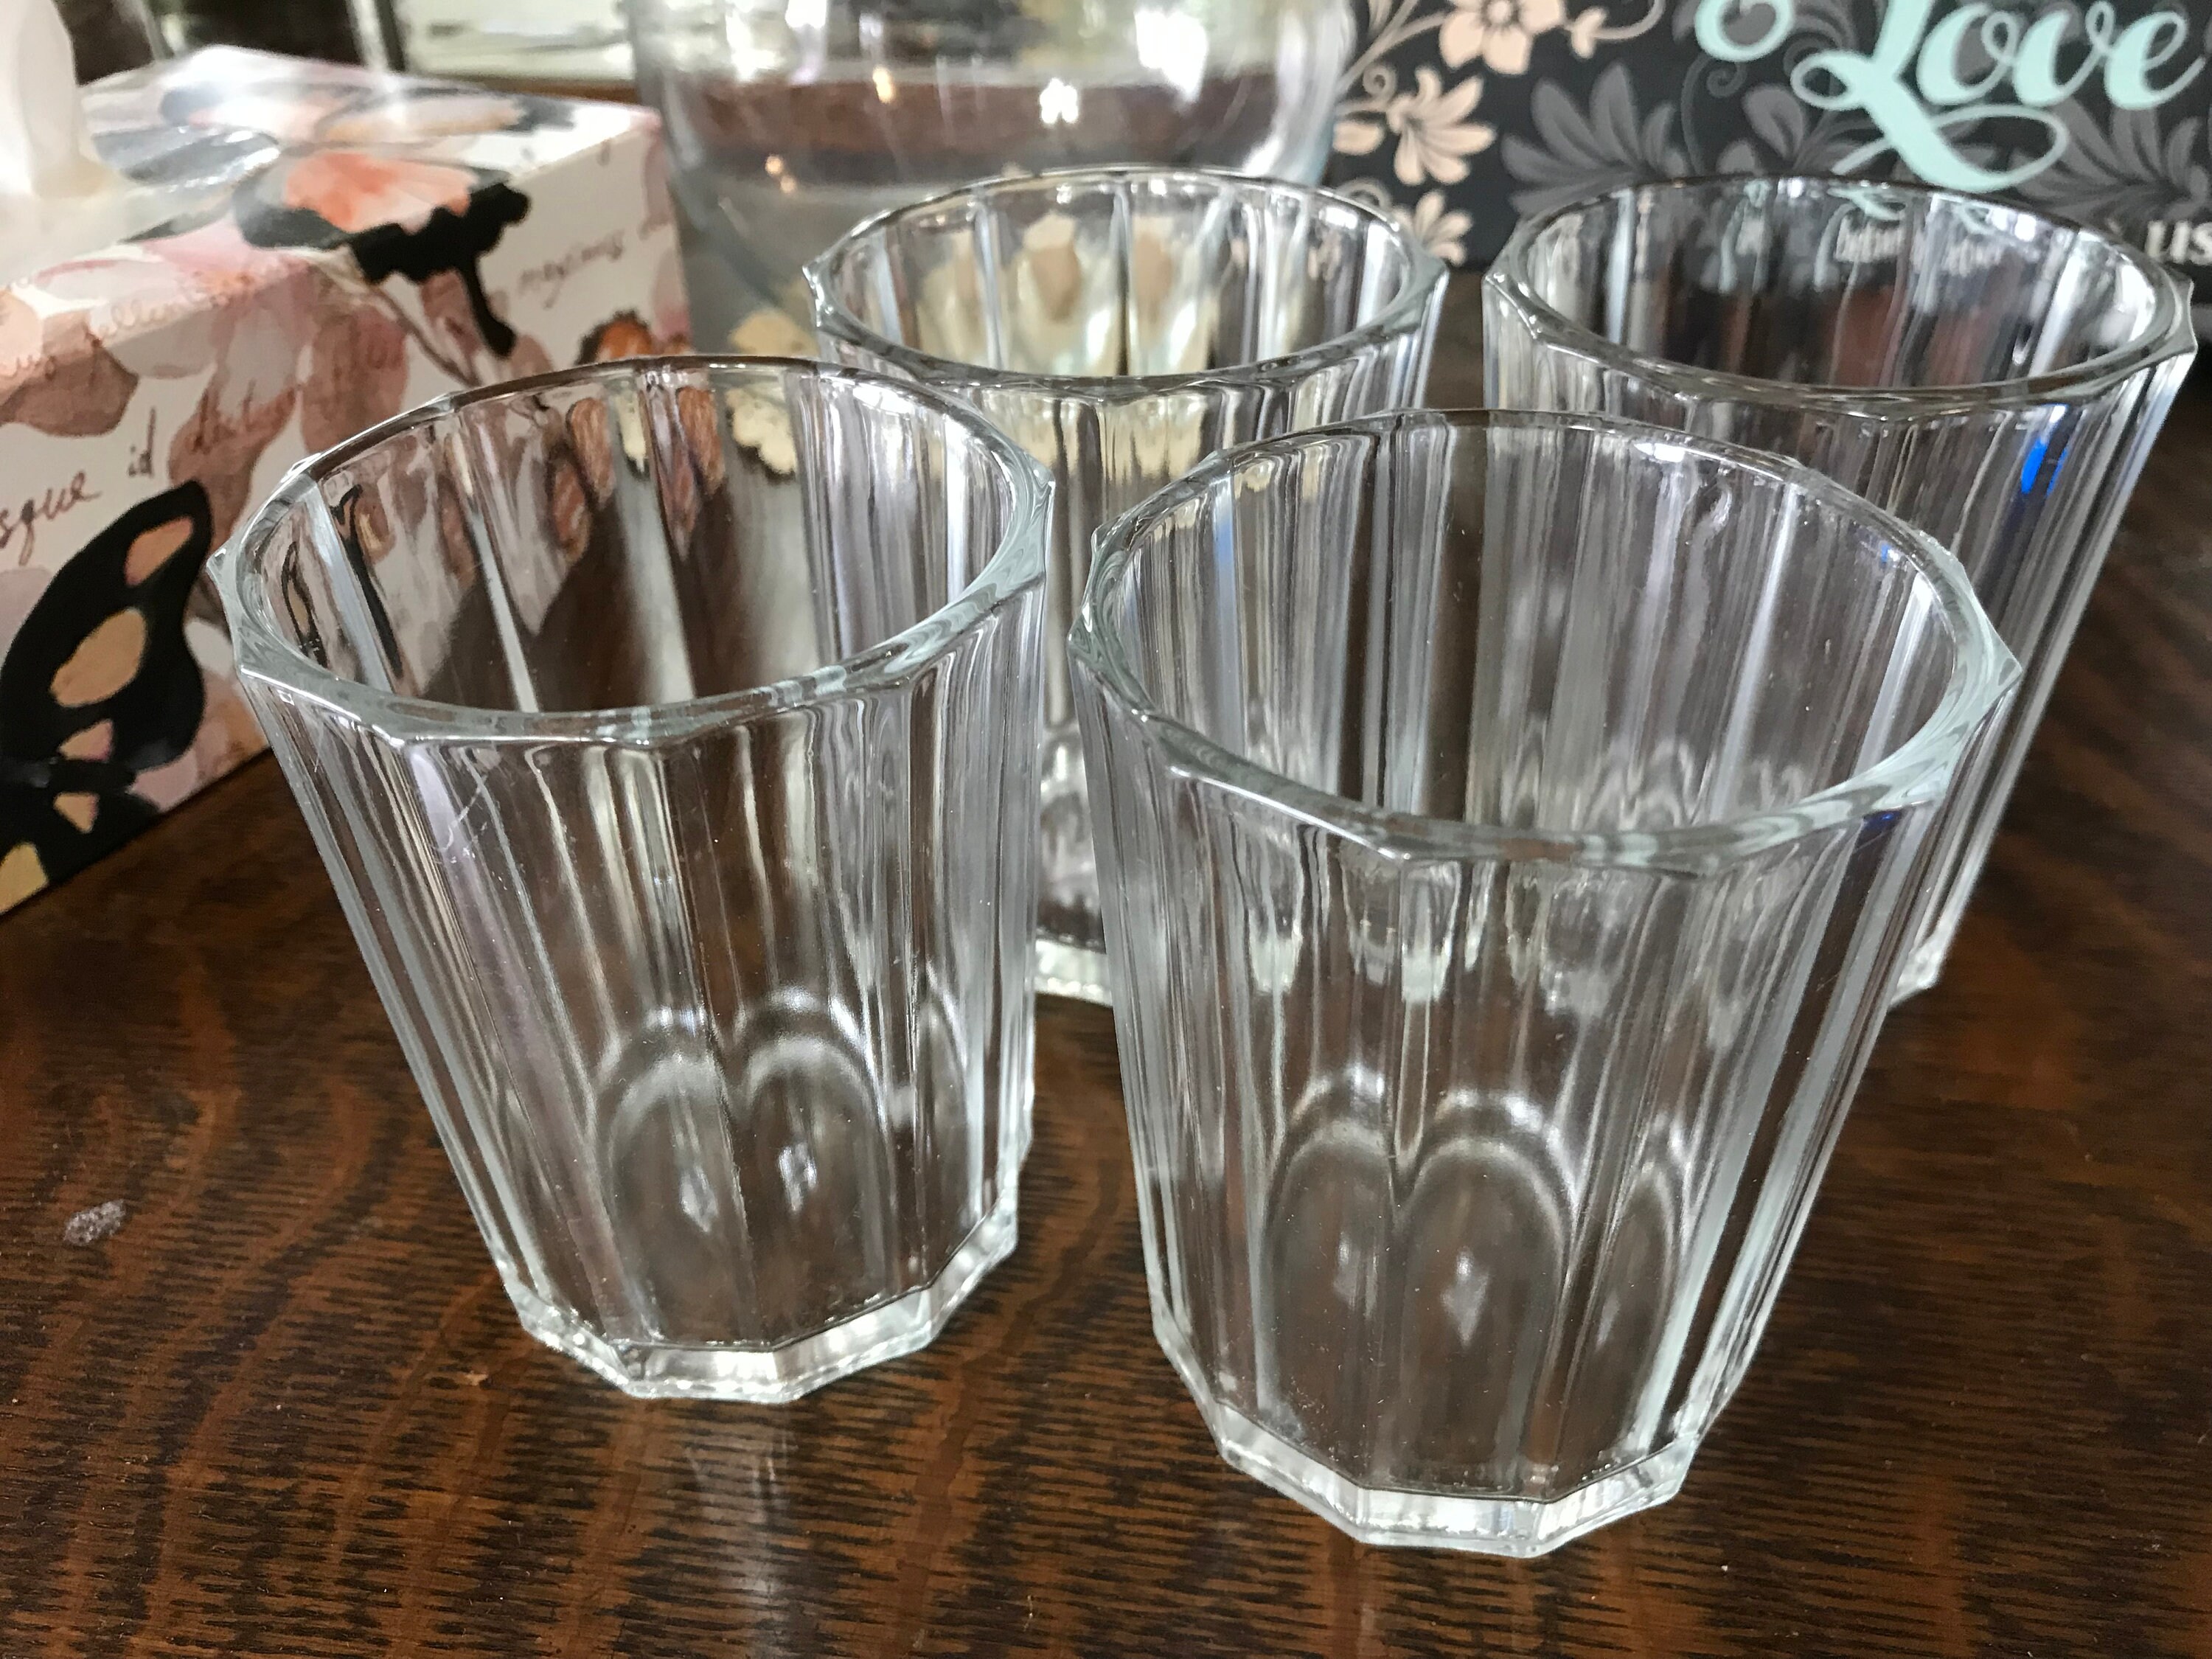 Vozoka Ribbed Glasses, 16 Oz Vintage Drinking Glasses with Lids and Straws  Set of 4, Clear Fluted Gl…See more Vozoka Ribbed Glasses, 16 Oz Vintage